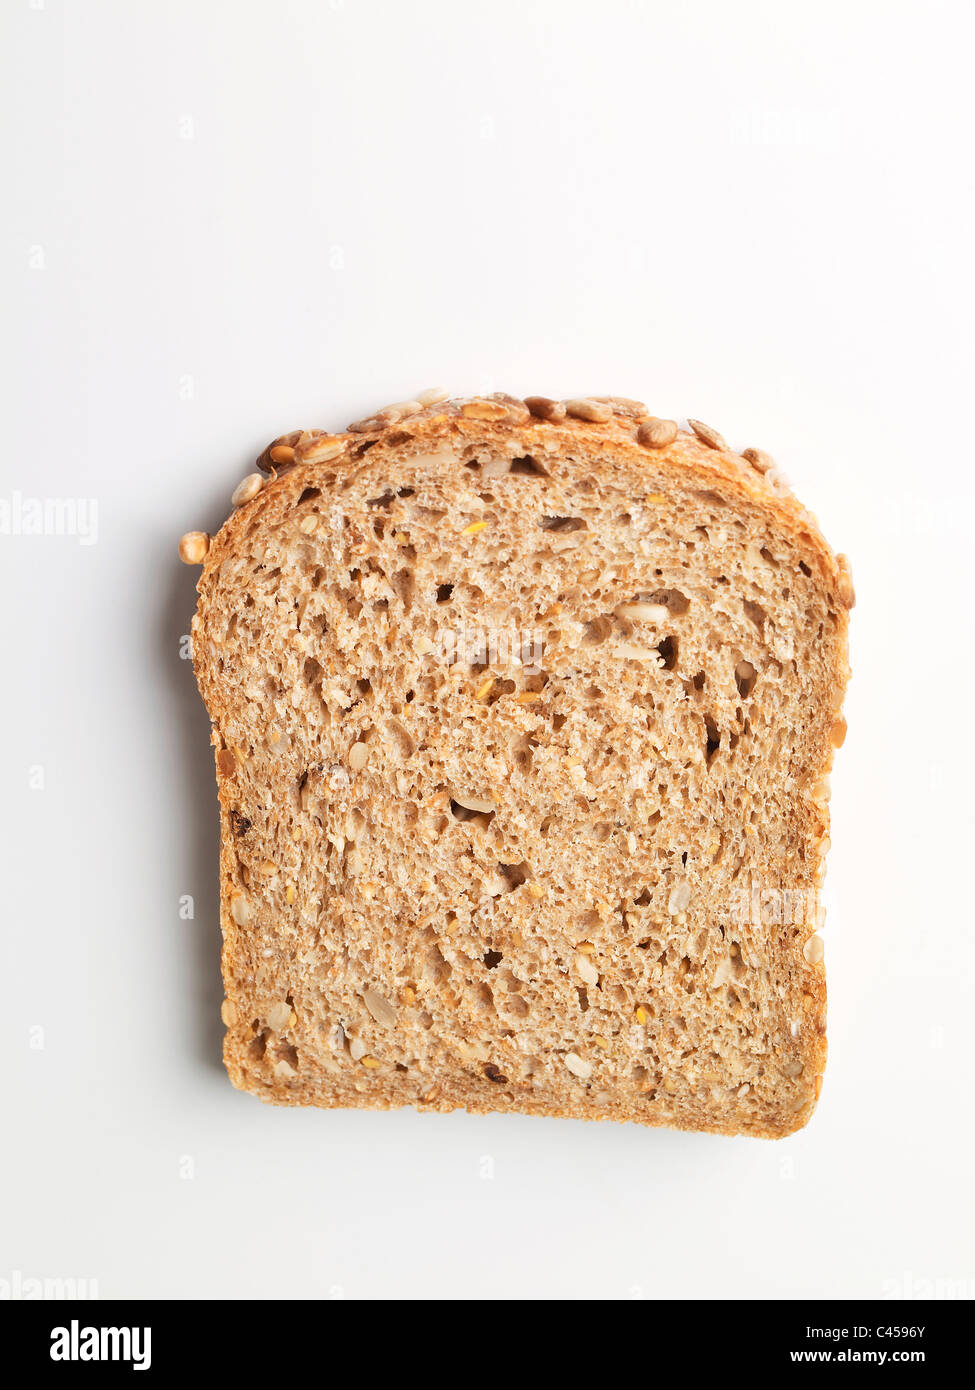 Slice of wholemeal bread on white background, close-up Stock Photo